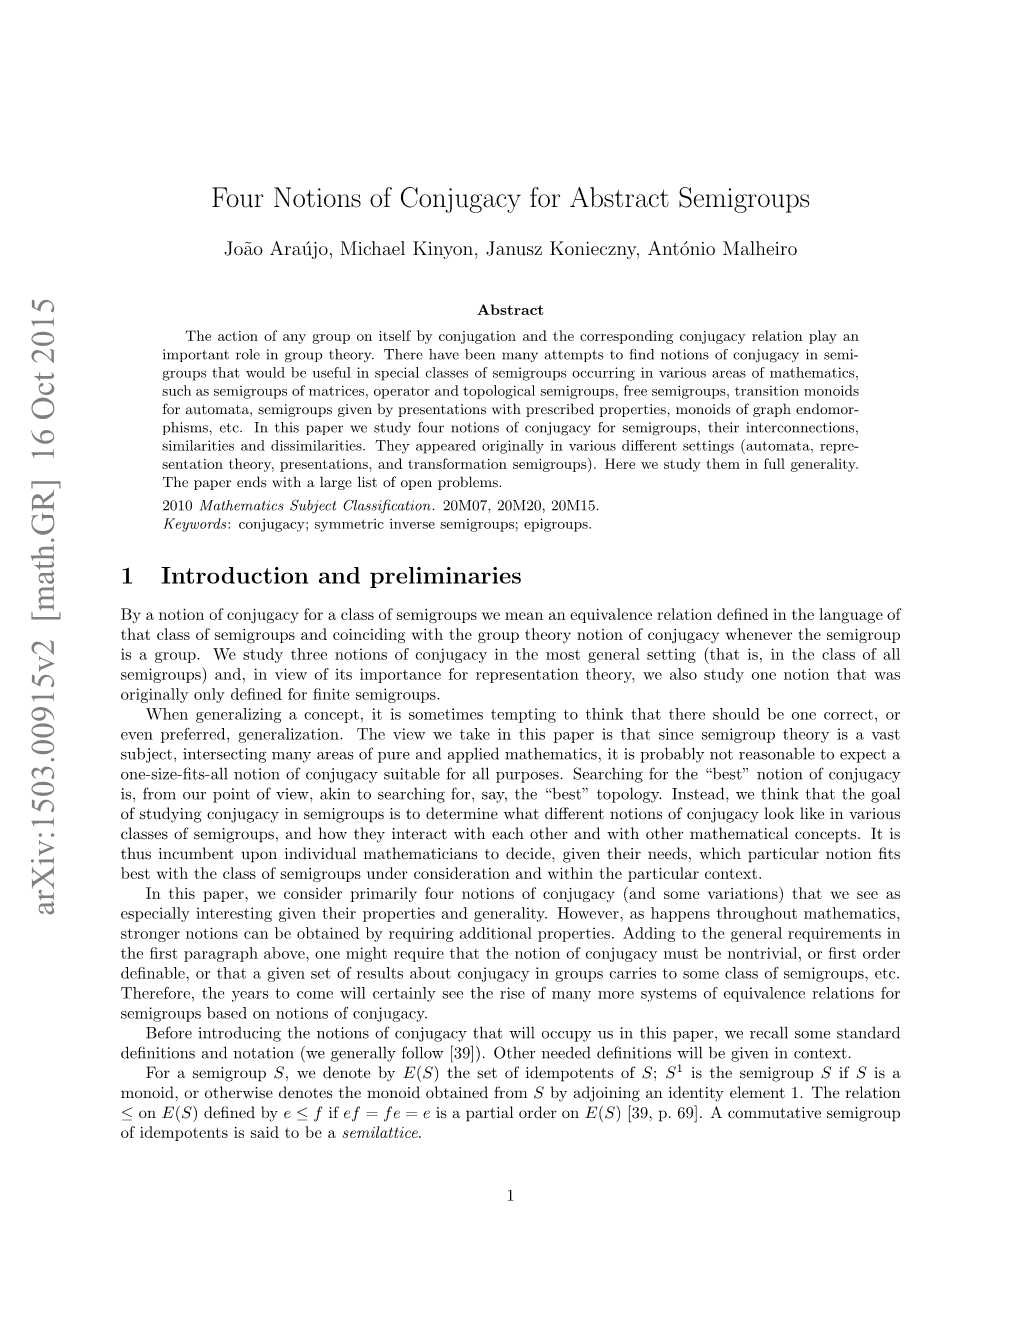 Four Notions of Conjugacy for Abstract Semigroups